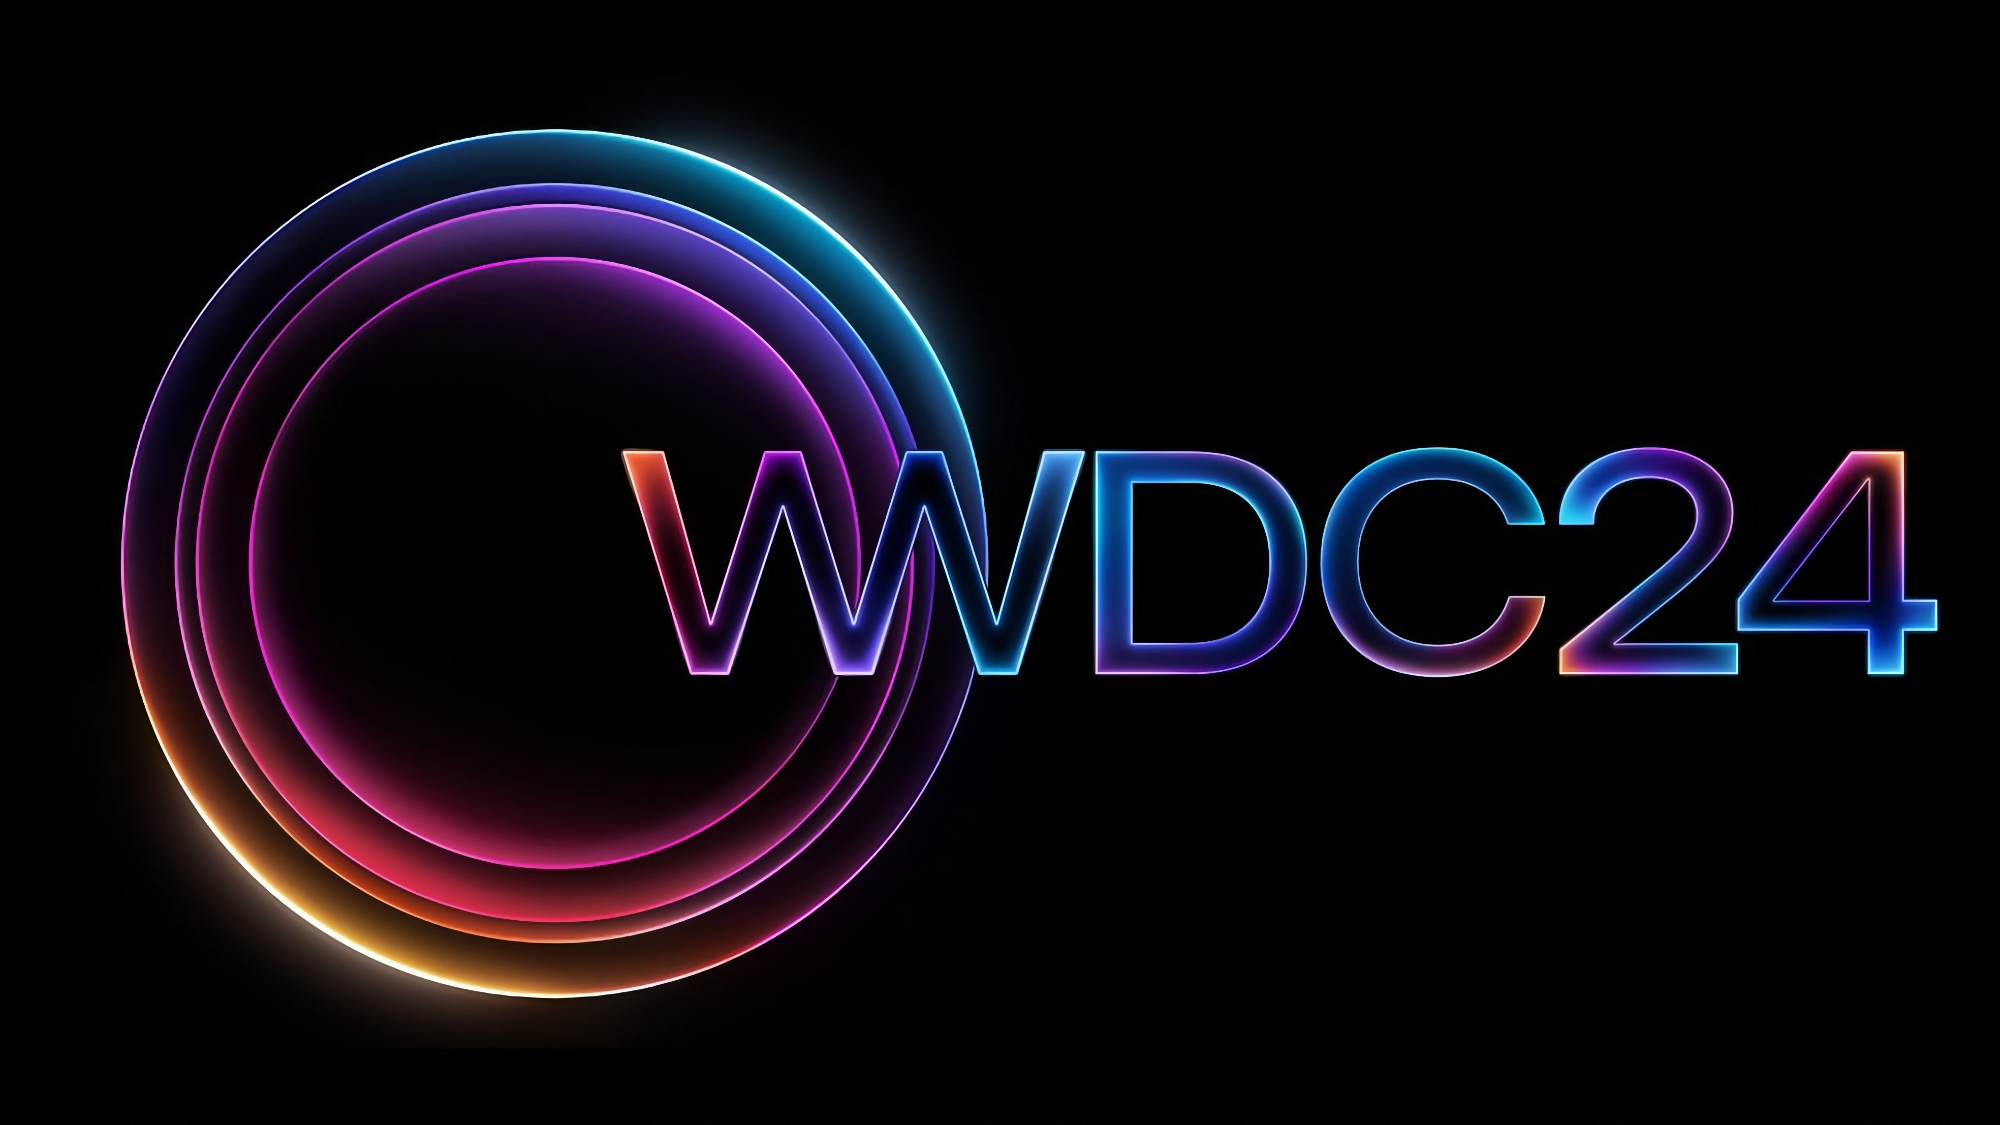 Bloomberg: Apple won't show new gadgets at WWDC 2024